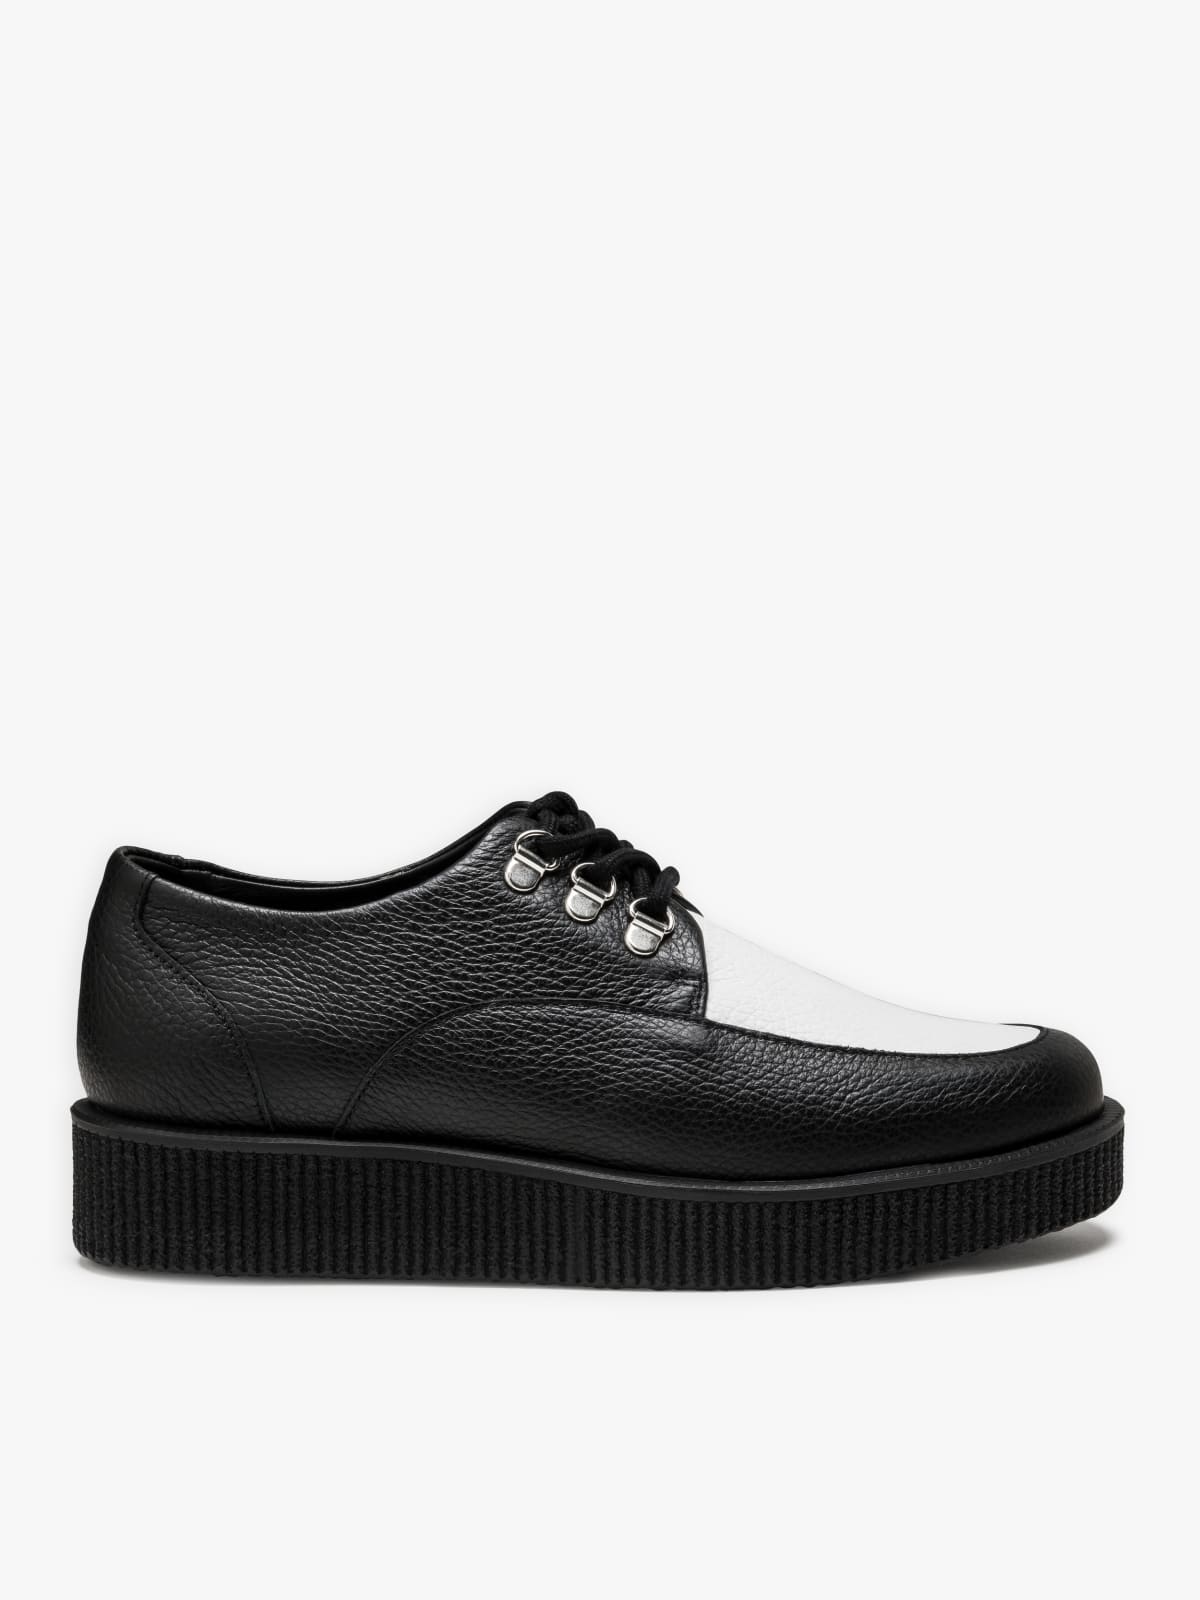 black and off white grained leather Amy creepers